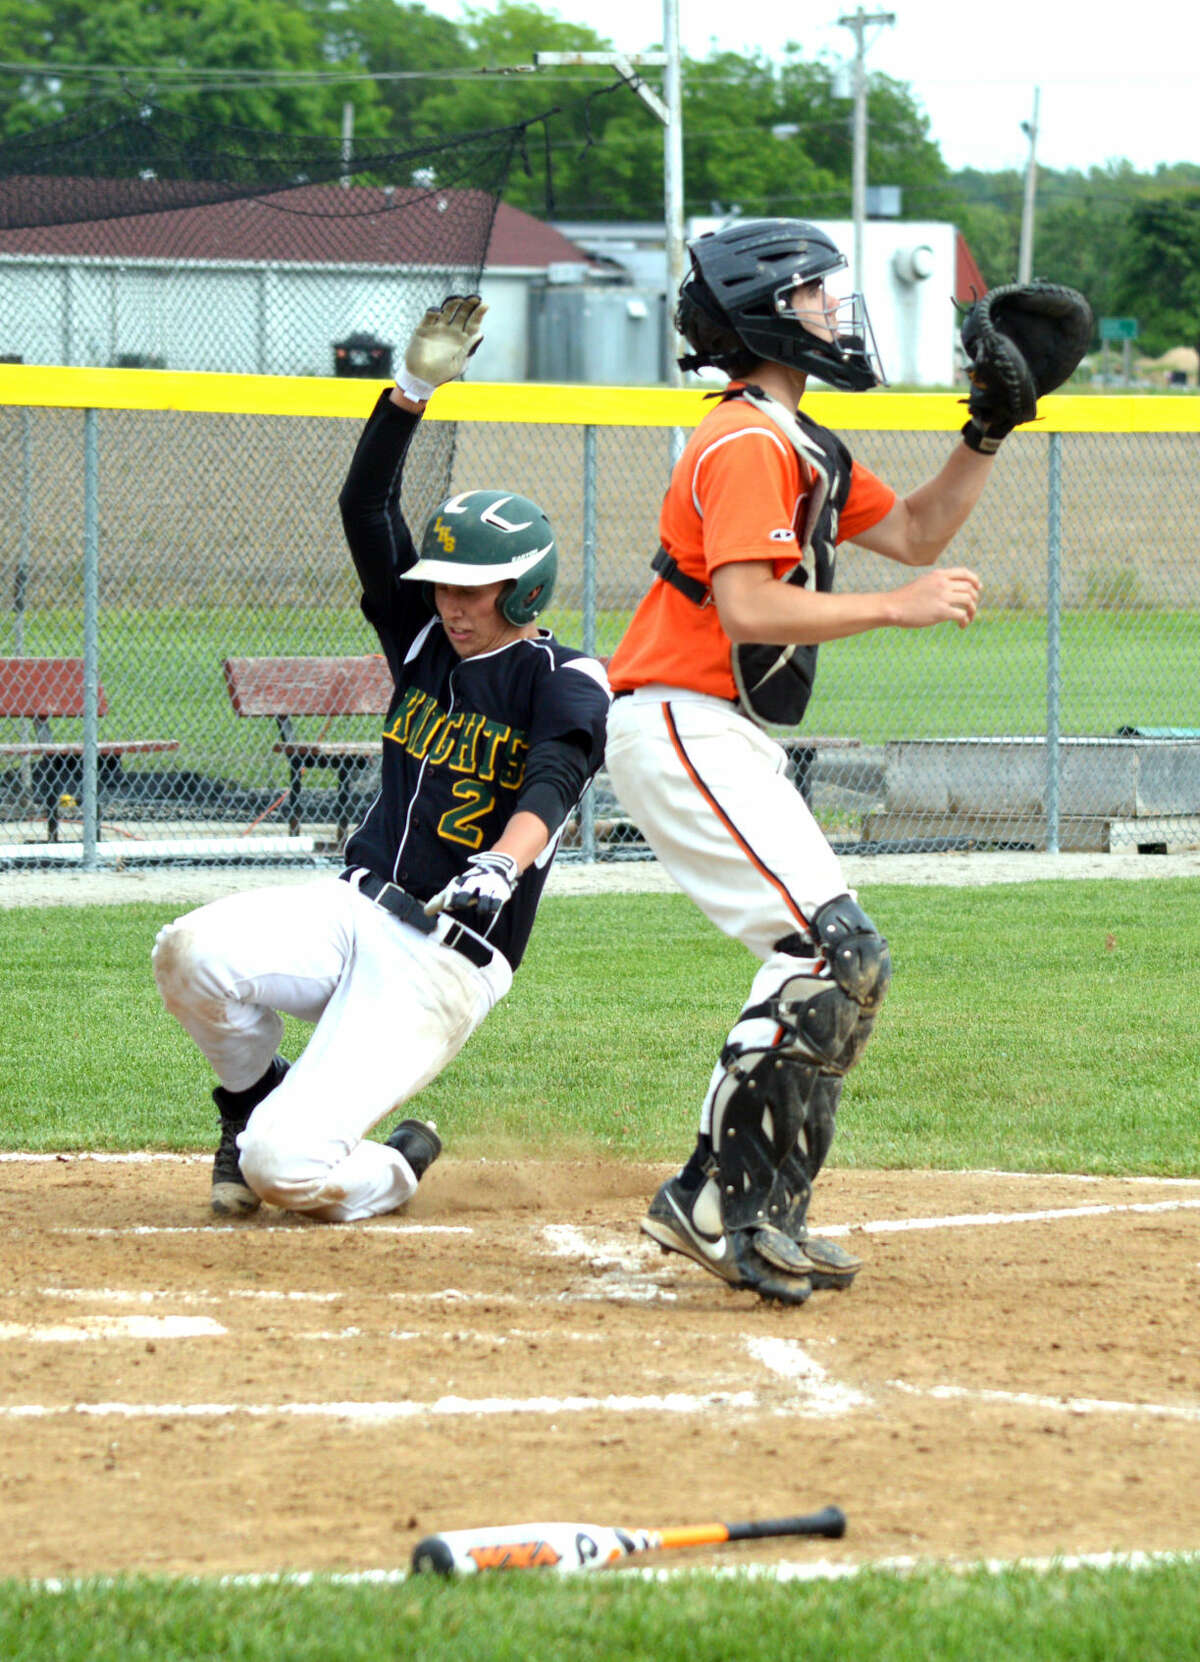 Metro junior Mikey Coulson scores a run in the second inning.